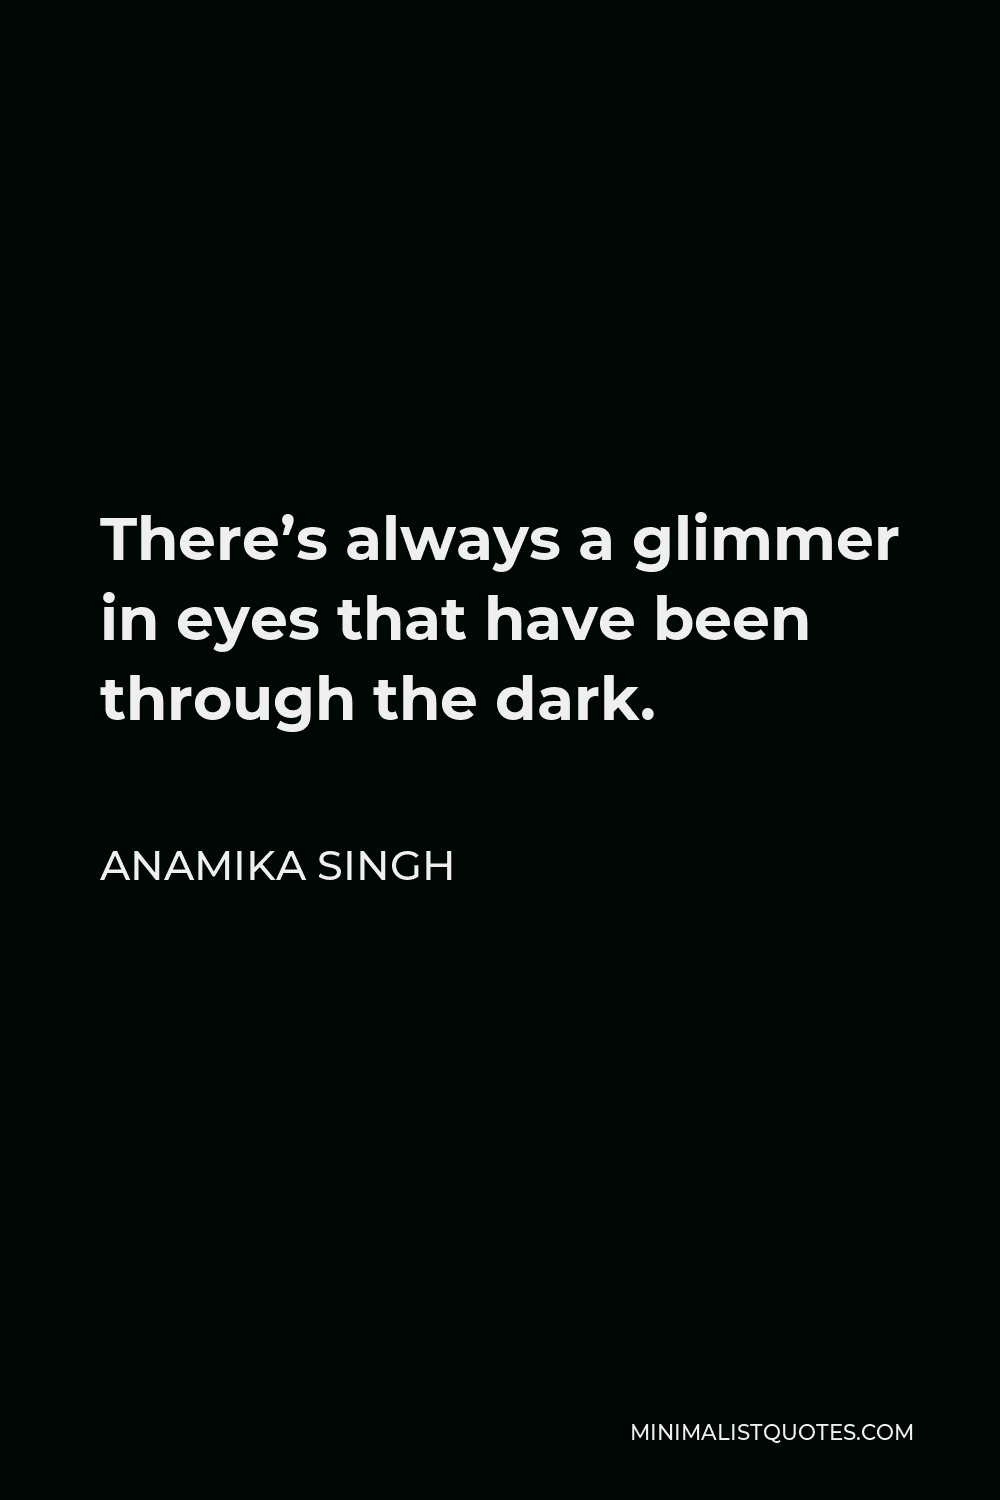 Anamika Singh Quote - There’s always a glimmer in eyes that have been through the dark.